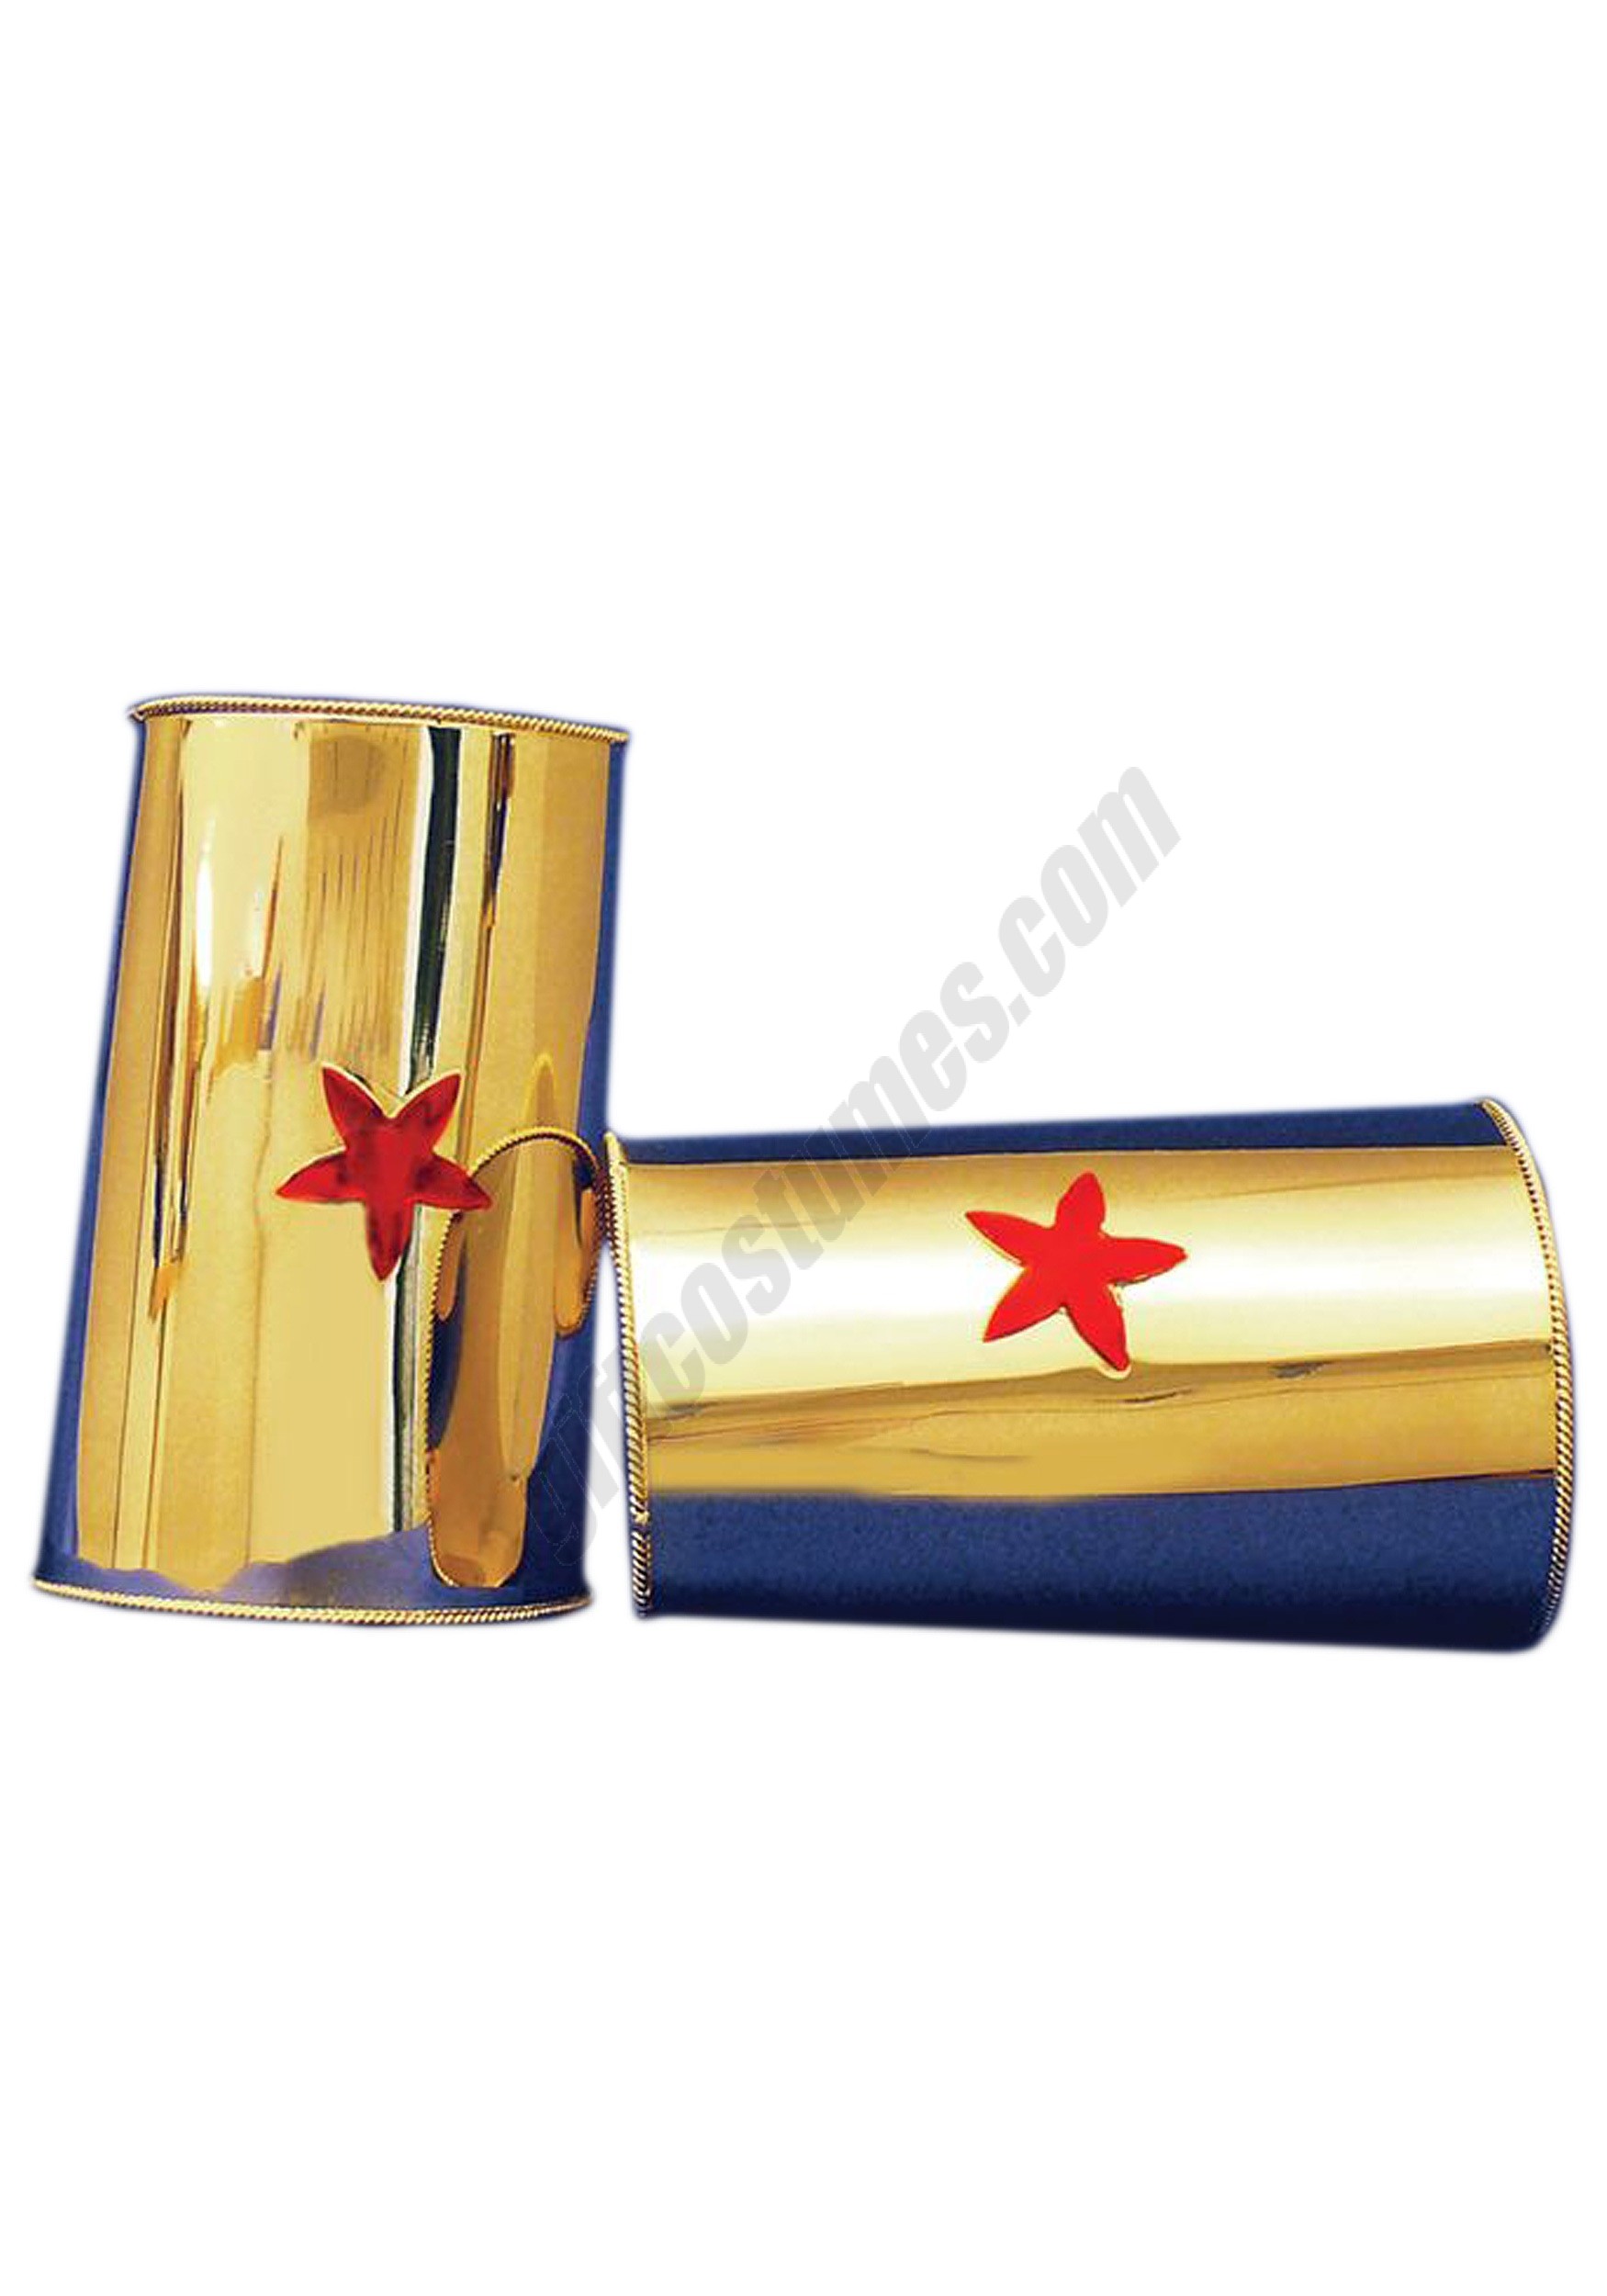 Red Star Gold Cuffs Promotions - Red Star Gold Cuffs Promotions